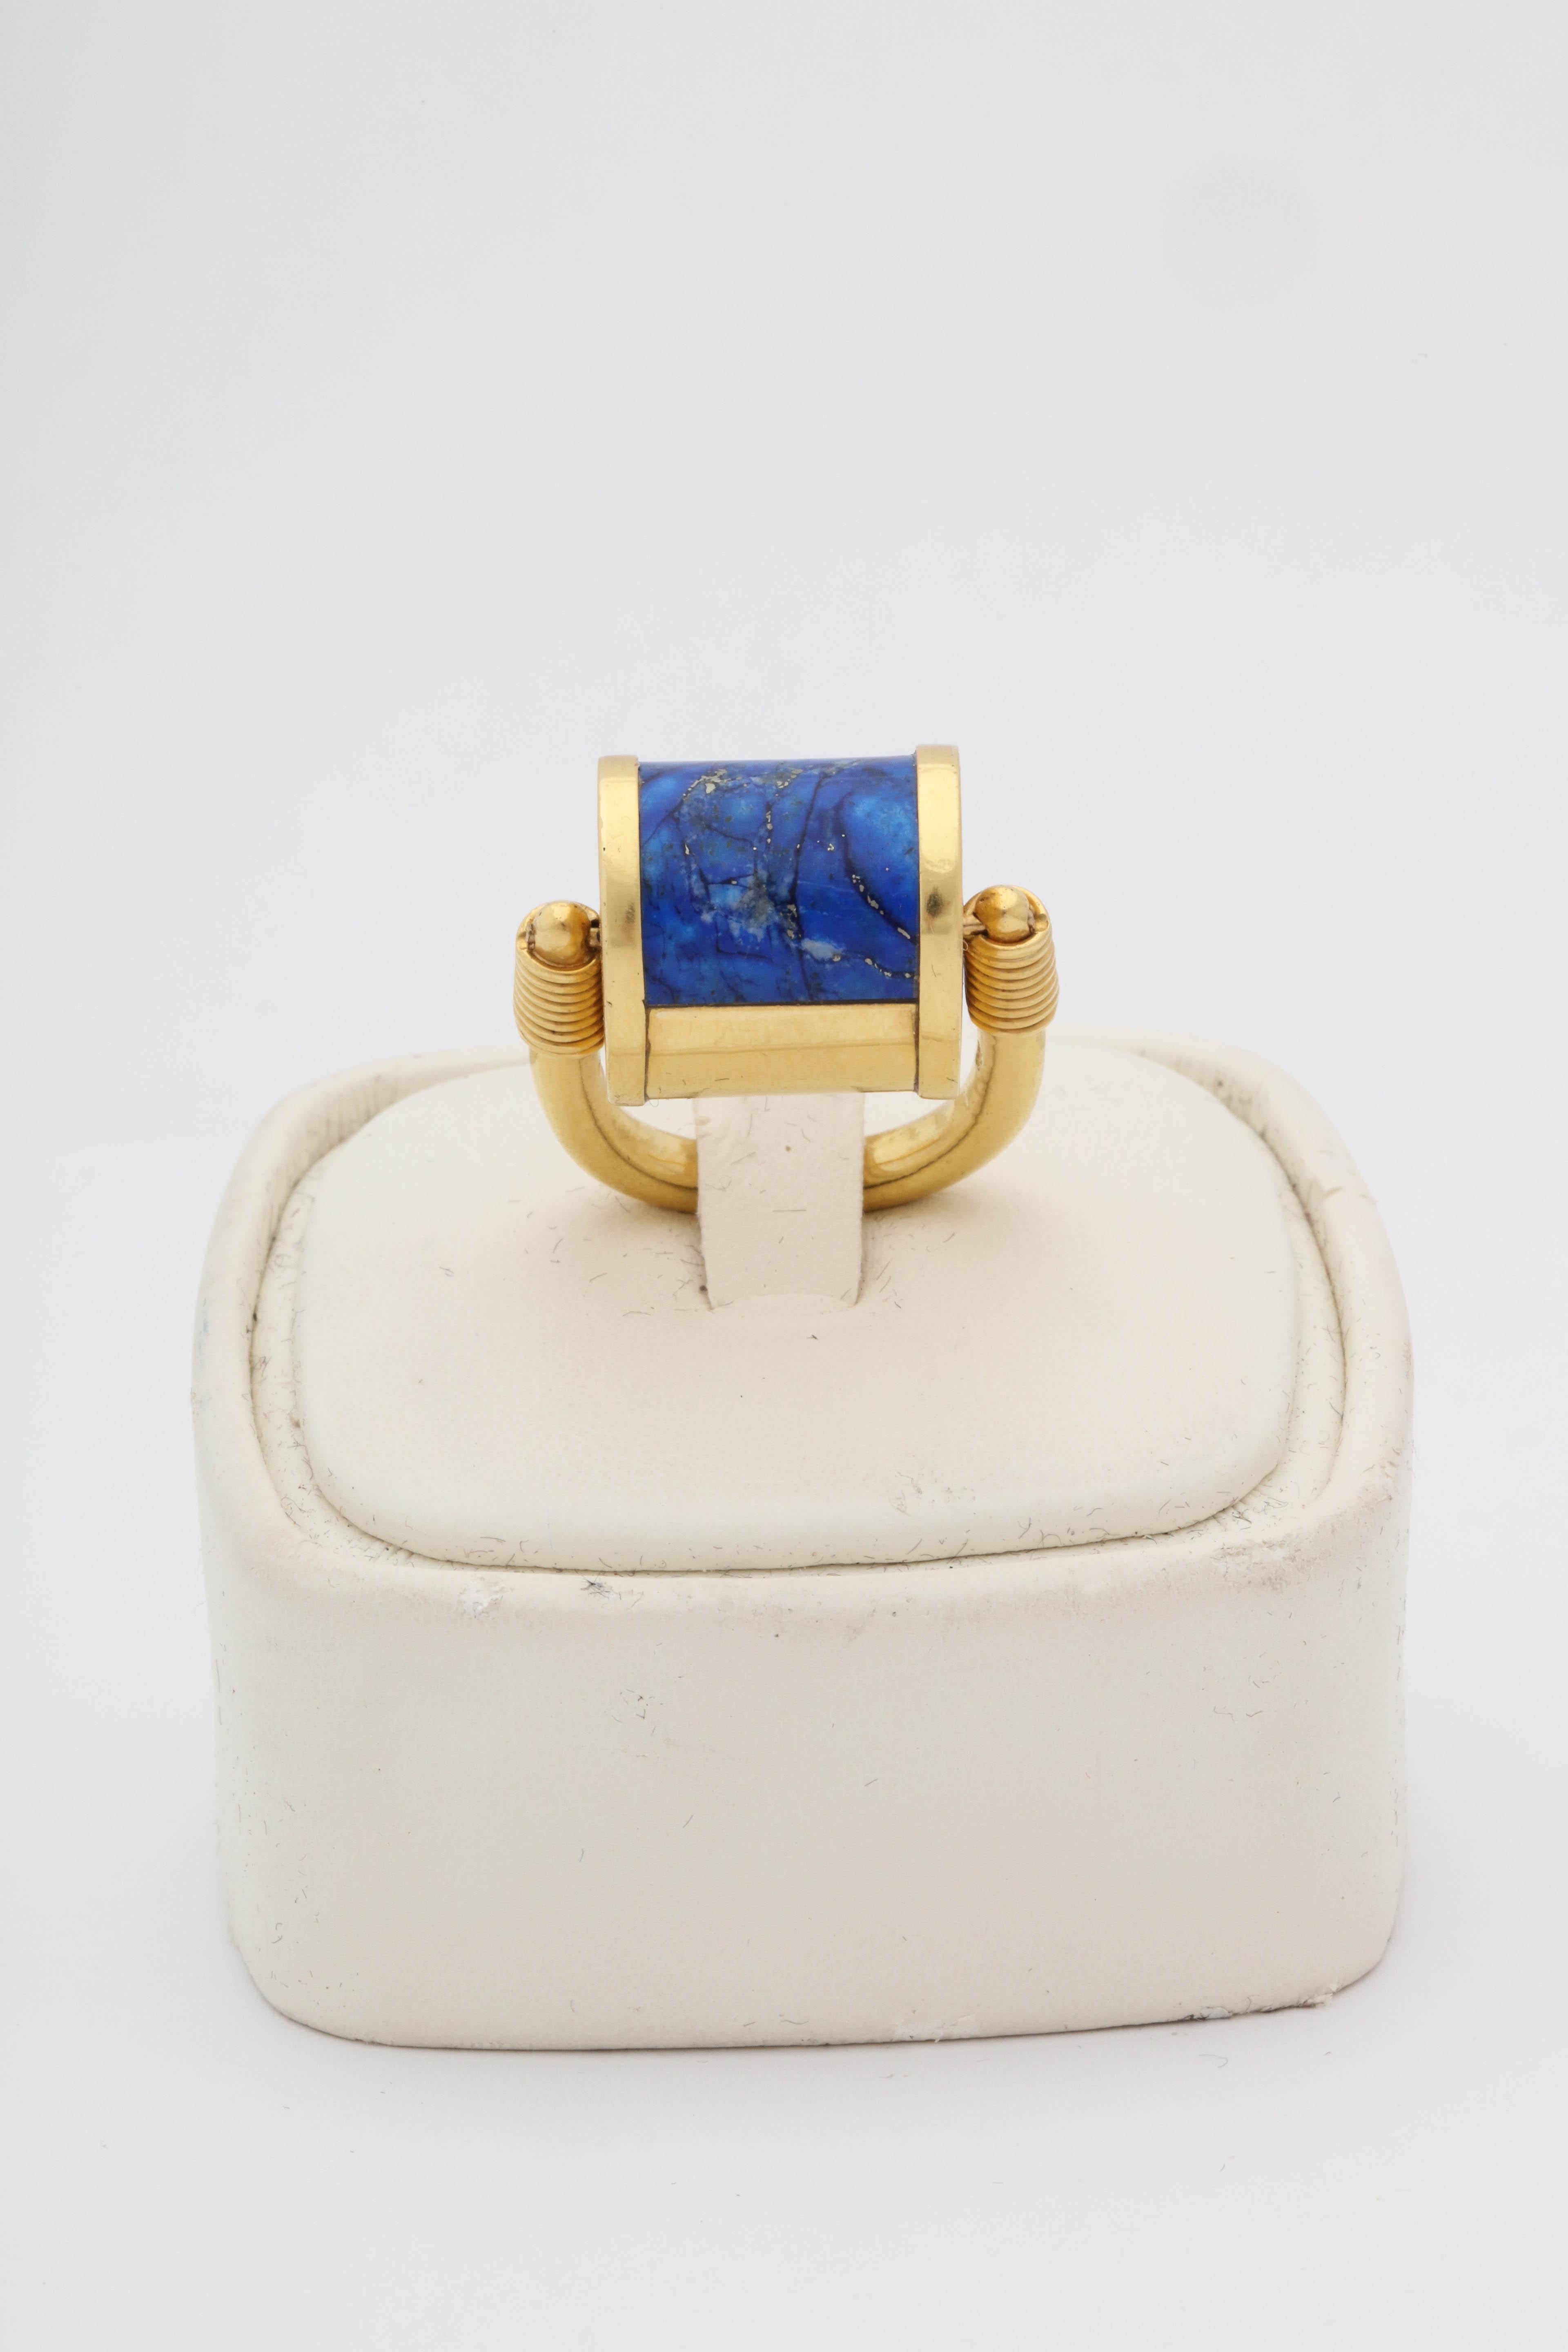 1980s Cellini Padlock Design Reversible Lapis Lazuli and Gold Rolltop Ring im Zustand „Gut“ in New York, NY